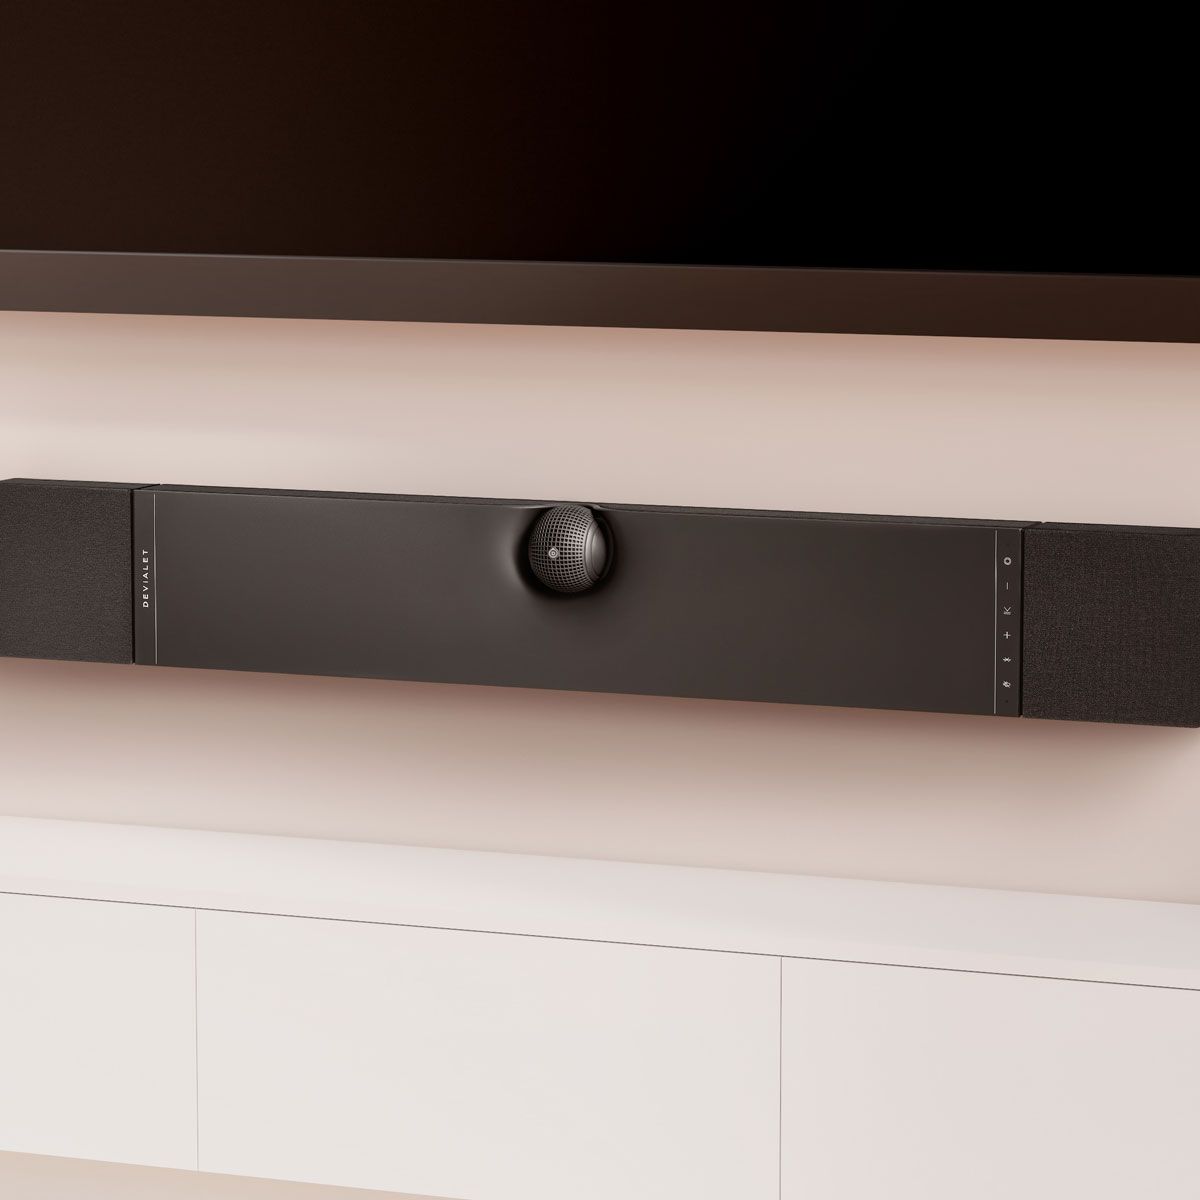 Devialet Dione Dolby Atmos Soundbar, on a wall beneath television in vertical configuration